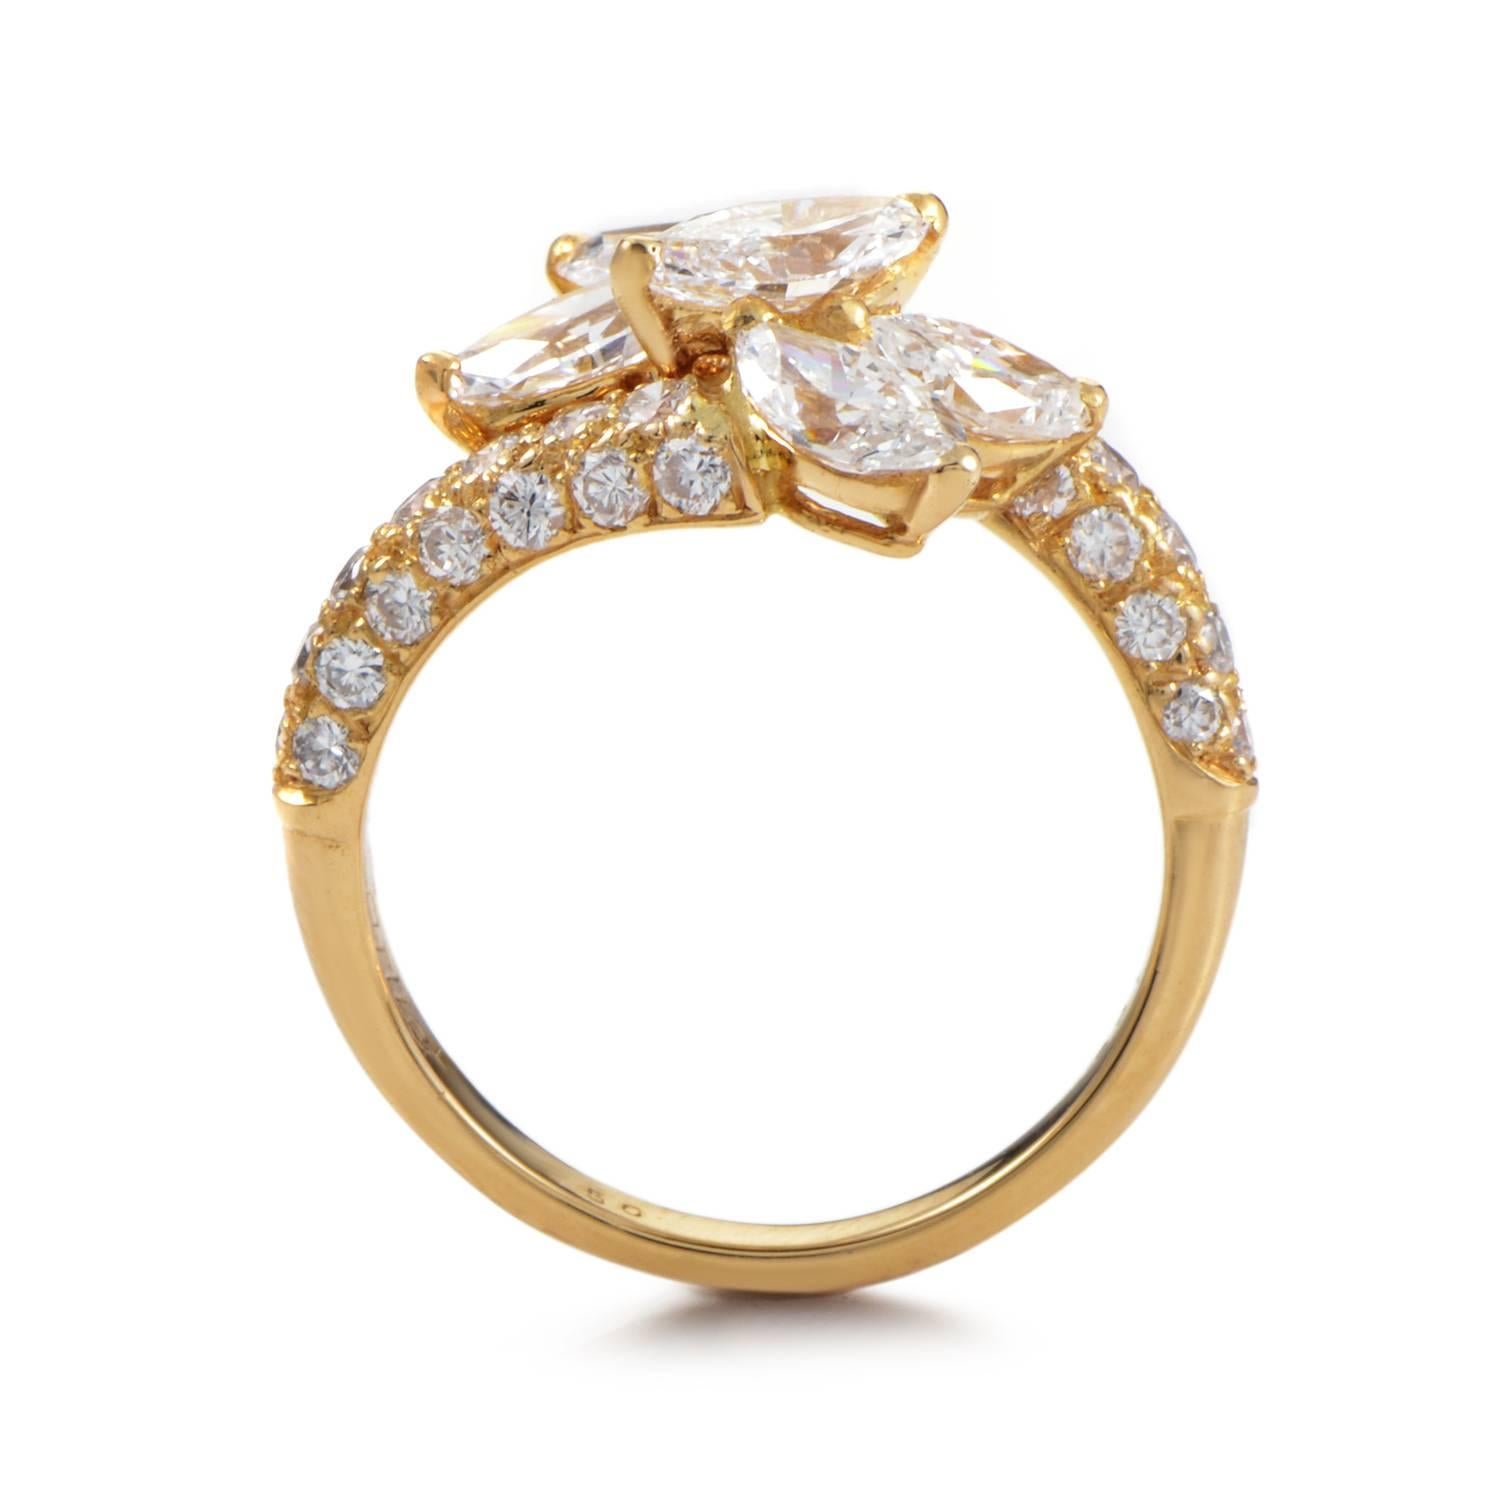 Spellbinding and eye-catching with its majestic sparkle and mesmerizing depth, the amazing arrangement of diamonds in this enchanting ring from Cartier weighs in total approximately 3.25 carats and blends tastefully with 18K yellow gold.
Included